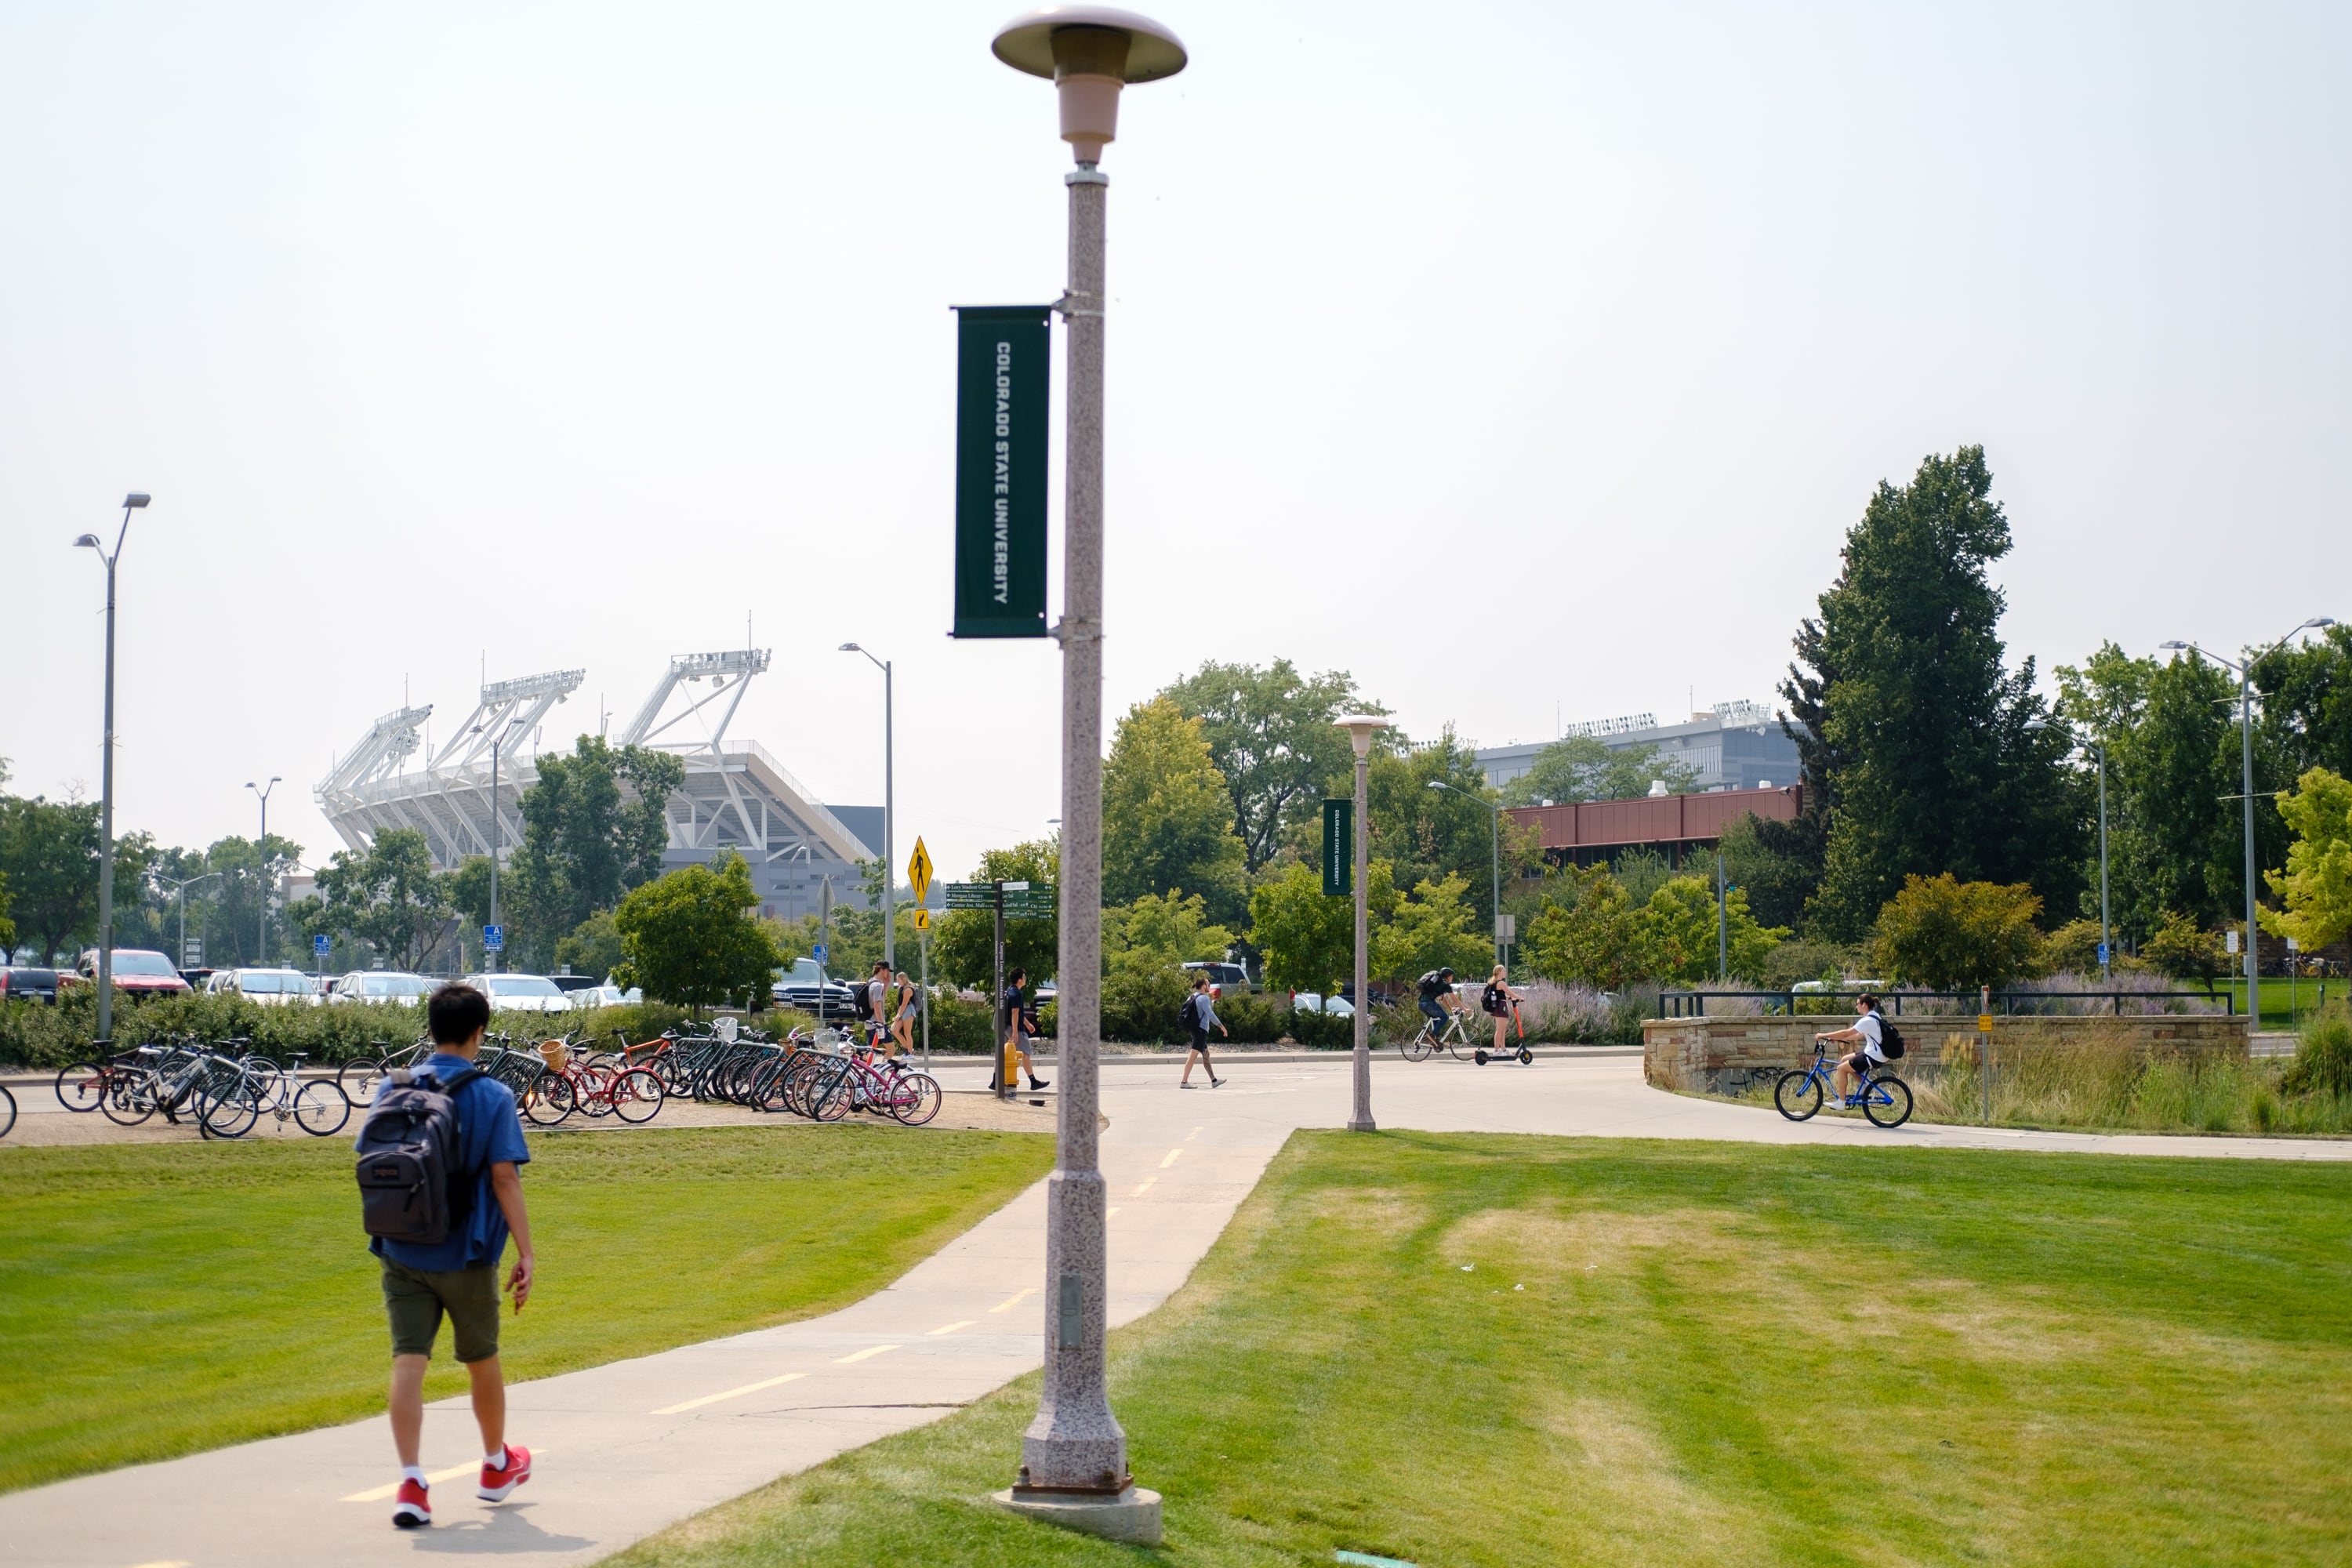 A college student with a black backpack walks on a sidewalk lined with grass and a view of a grey stadium in the background.